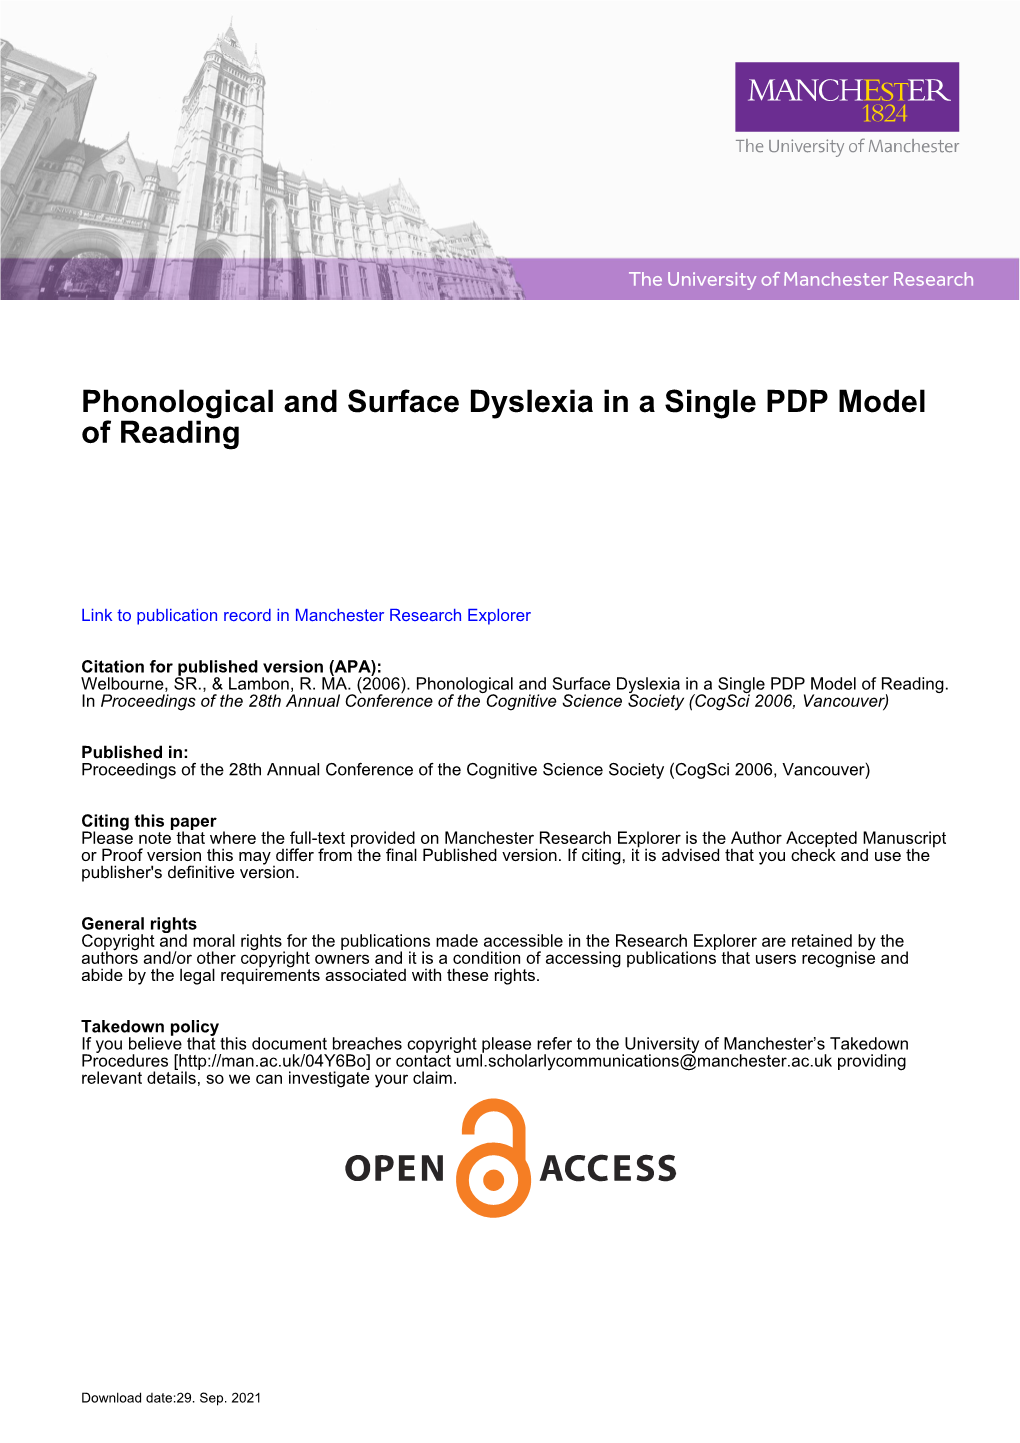 Phonological and Surface Dyslexia in a Single PDP Model of Reading